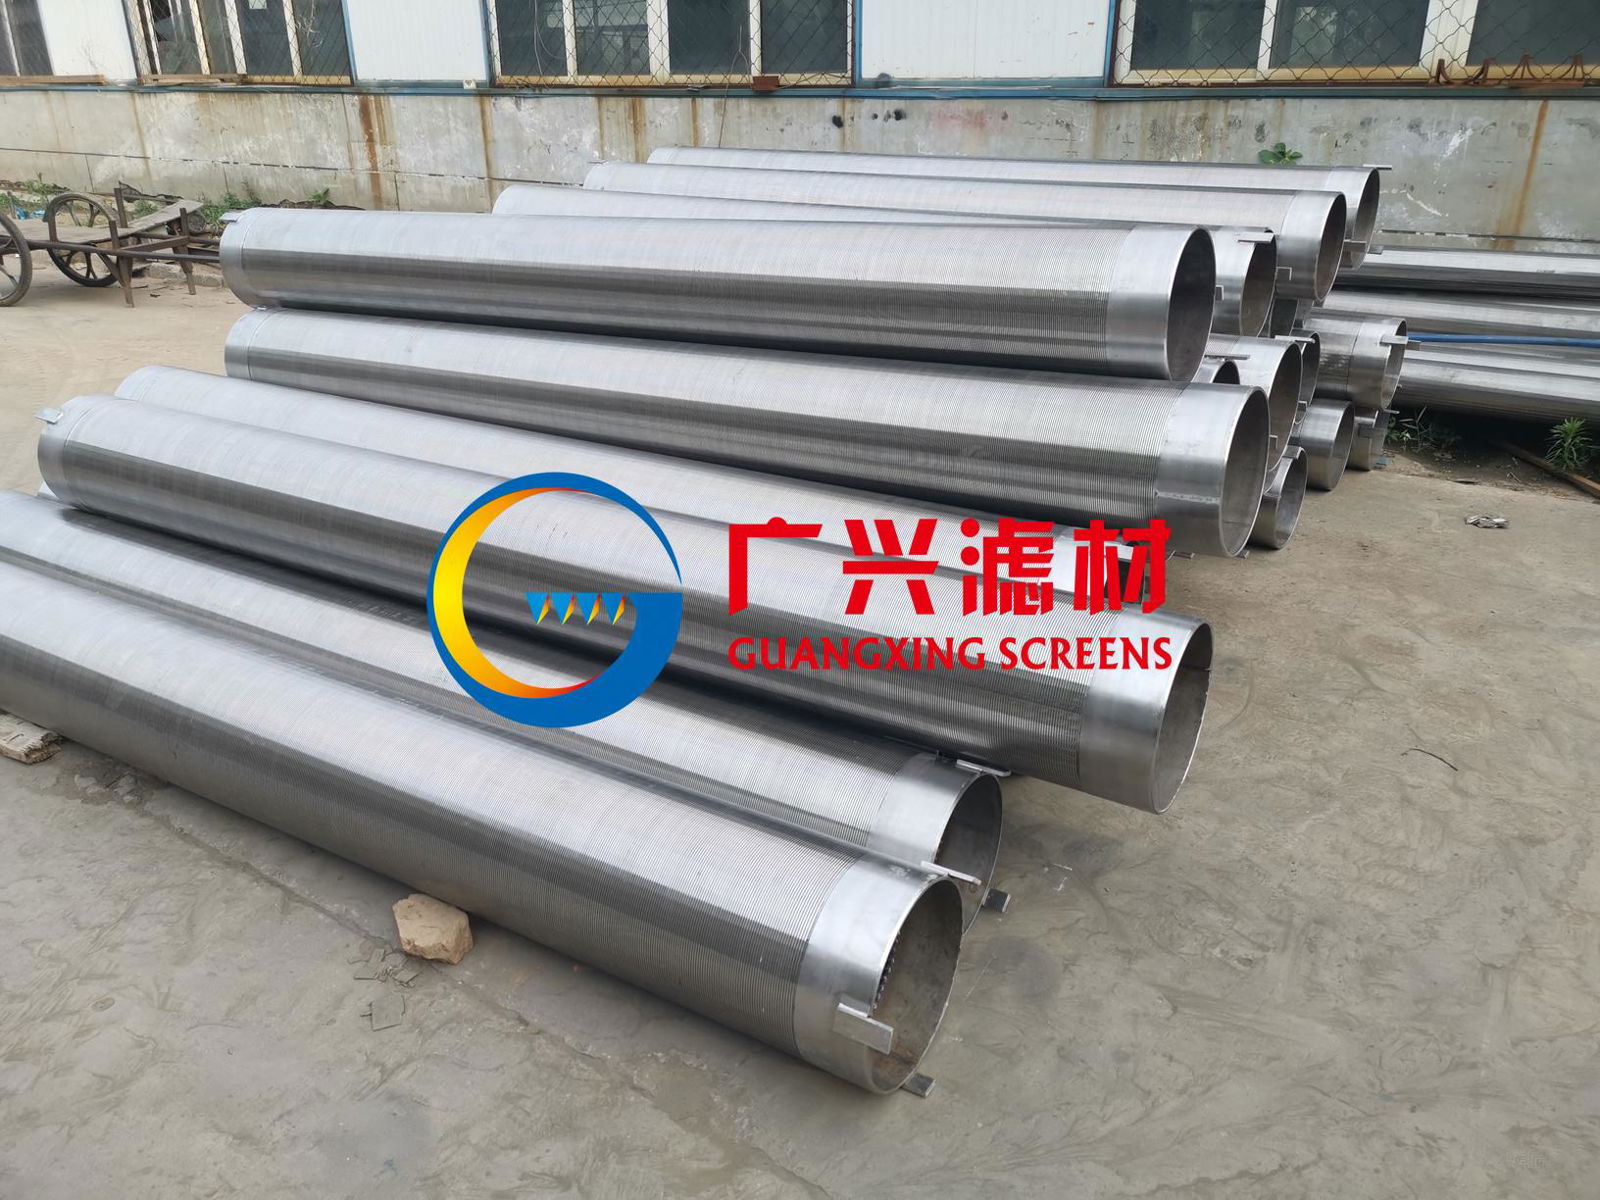 Sand screen tube for ground temperature air conditioning well